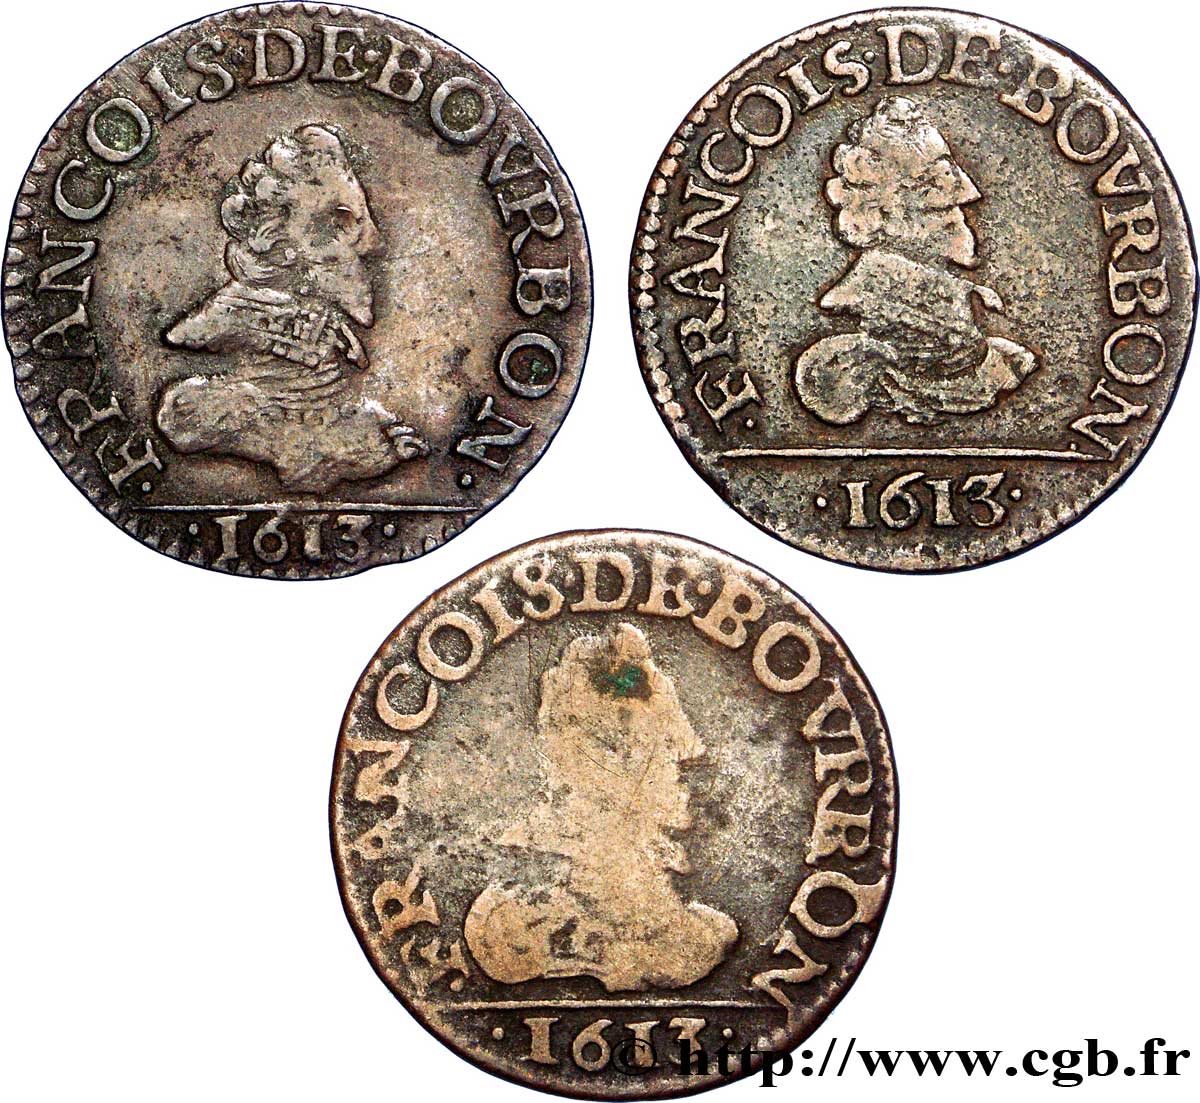 PRINCIPALITY OF CHATEAU-REGNAULT - FRANCIS OF BOURBON-CONTI Lot de 3 liards, type 2 XF